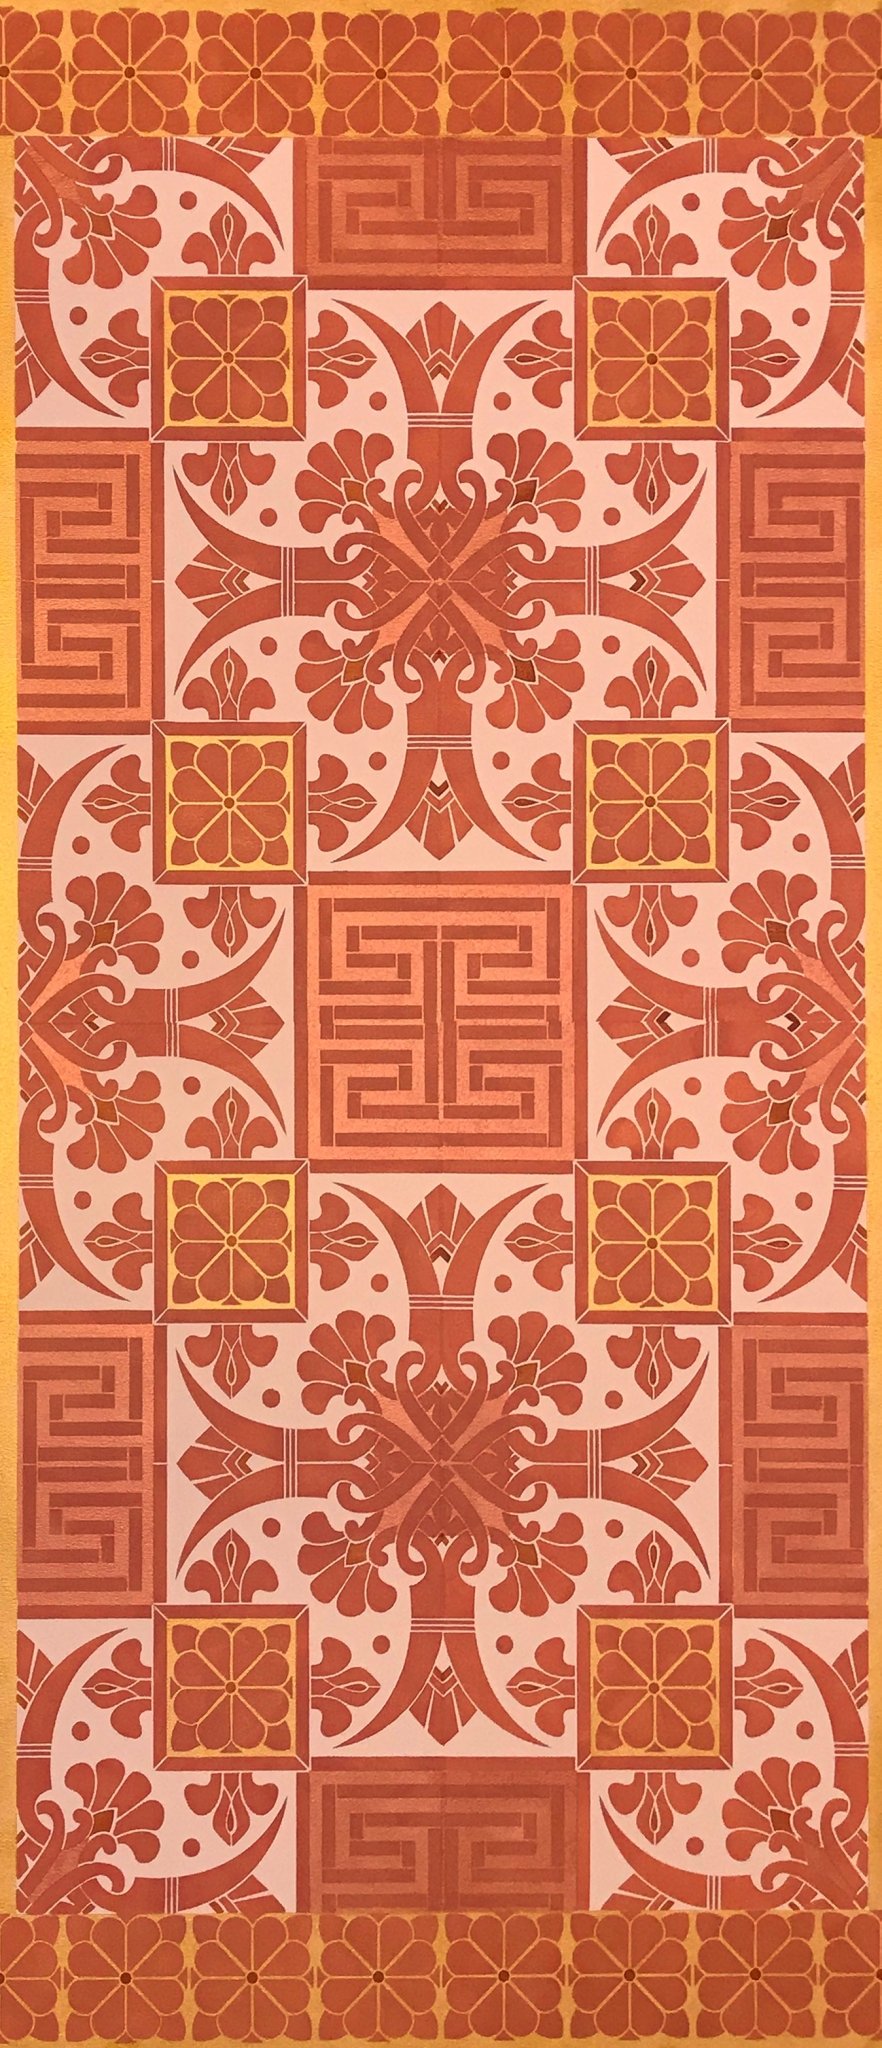 Full image of this floorcloth based on a Christopher Dresser pattern in pink, copper and gold tones.